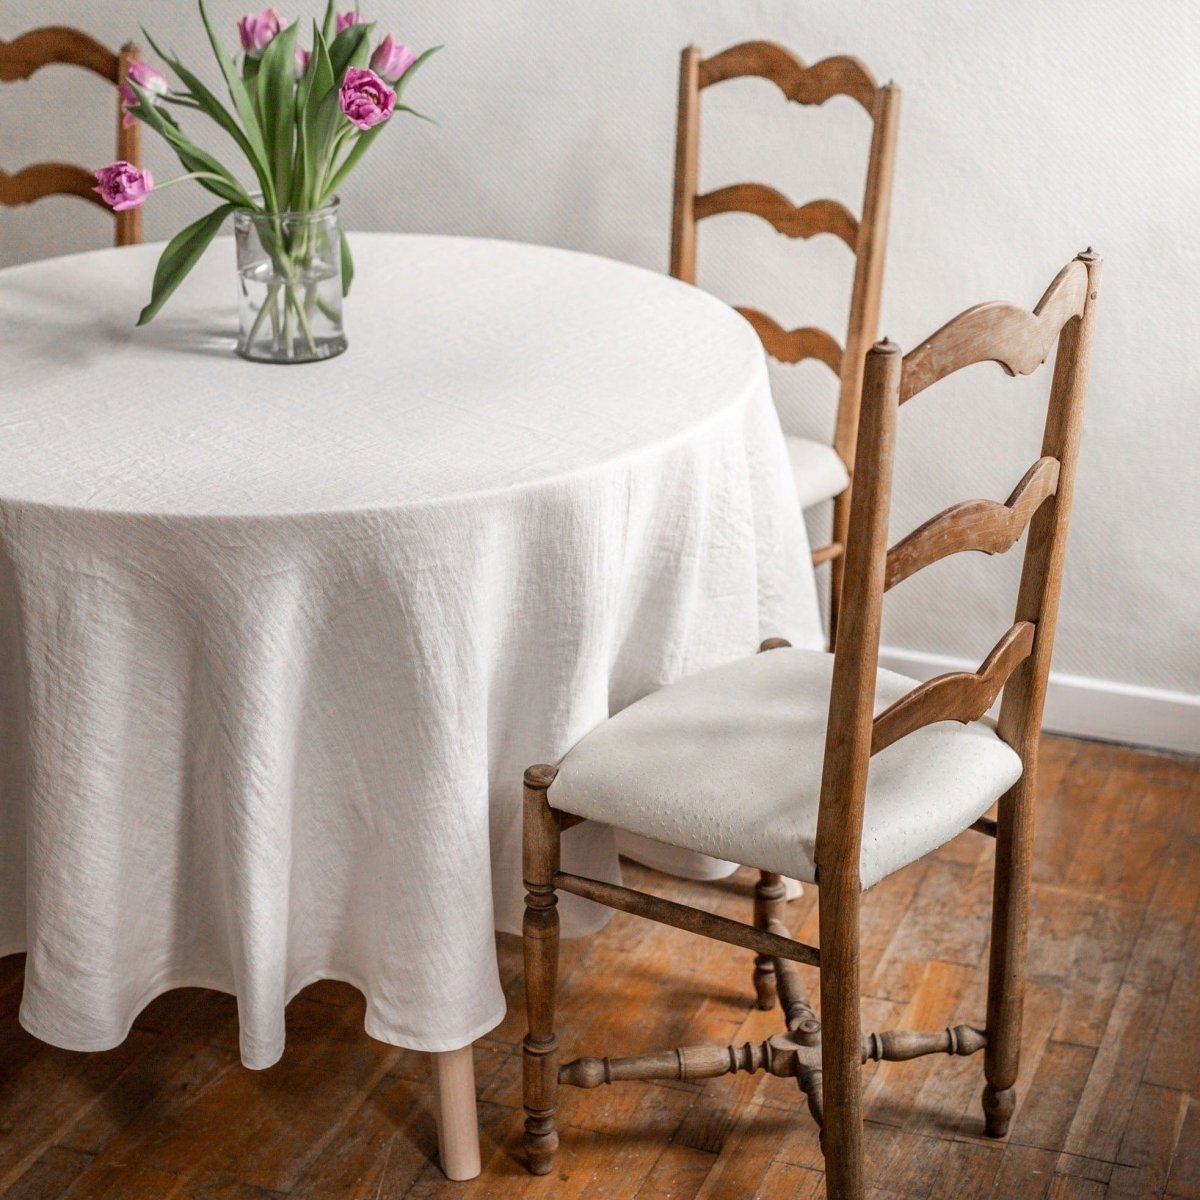 Round 100% Linen Tablecloth - Linen and Letters